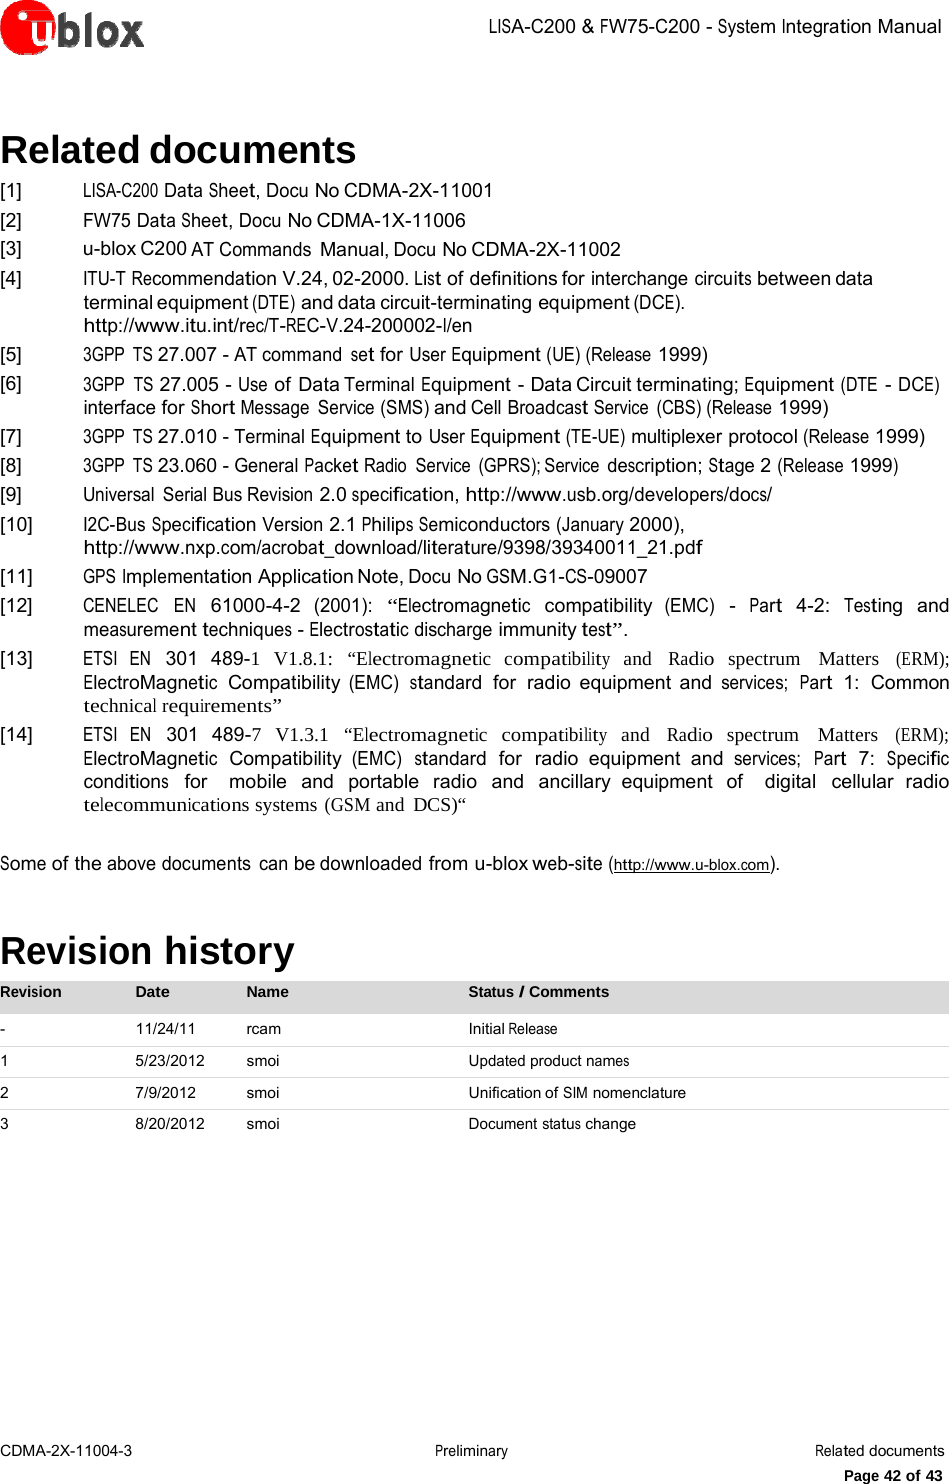 LISA-C200&amp;FW75-C200-System IntegrationManualCDMA-2X-11004-3 PreliminaryRelated documentsPage 42 of 43Related documents [1] LISA-C200 Data Sheet, Docu No CDMA-2X-11001 [2] FW75 Data Sheet, Docu No CDMA-1X-11006 [3] u-blox C200 AT Commands Manual, Docu No CDMA-2X-11002 [4] ITU-T Recommendation V.24, 02-2000. List of definitions for interchange circuits between data terminal equipment (DTE) and data circuit-terminating equipment (DCE). http://www.itu.int/rec/T-REC-V.24-200002-I/en [5] 3GPP TS 27.007 - AT command set for User Equipment (UE) (Release 1999) [6] 3GPP  TS 27.005 - Use of Data Terminal Equipment - Data Circuit terminating; Equipment (DTE - DCE) interface for Short Message Service (SMS) and Cell Broadcast Service (CBS) (Release 1999) [7] 3GPP TS 27.010 - Terminal Equipment to User Equipment (TE-UE) multiplexer protocol (Release 1999) [8] 3GPP TS 23.060 - General Packet Radio Service (GPRS); Service description; Stage 2 (Release 1999) [9] Universal Serial Bus Revision 2.0 specification, http://www.usb.org/developers/docs/ [10] I2C-Bus Specification Version 2.1 Philips Semiconductors (January 2000), http://www.nxp.com/acrobat_download/literature/9398/39340011_21.pdf [11] GPS Implementation Application Note, Docu No GSM.G1-CS-09007 [12] CENELEC   EN   61000-4-2  (2001):  “Electromagnetic  compatibility  (EMC)  -  Part  4-2:  Testing  and measurement techniques - Electrostatic discharge immunity test”. [13] ETSI   EN   301  489-1  V1.8.1:  “Electromagnetic  compatibility  and   Radio   spectrum   Matters   (ERM); ElectroMagnetic  Compatibility (EMC)  standard  for  radio  equipment  and services;  Part  1:  Common technical requirements” [14] ETSI   EN   301  489-7   V1.3.1  “Electromagnetic   compatibility   and   Radio   spectrum    Matters   (ERM); ElectroMagnetic Compatibility (EMC) standard for radio equipment and services; Part 7: Specific conditions for  mobile and portable radio and ancillary equipment of  digital cellular radio telecommunications systems (GSM and DCS)“ Some of the above documents  can be downloaded from u-blox web-site (http://www.u-blox.com). Revision history Revision Date Name Status / Comments - 11/24/11 rcam  Initial Release 1 5/23/2012 smoi Updated product names 2 7/9/2012 smoi  Unification of SIM nomenclature 3 8/20/2012 smoi Document status change 